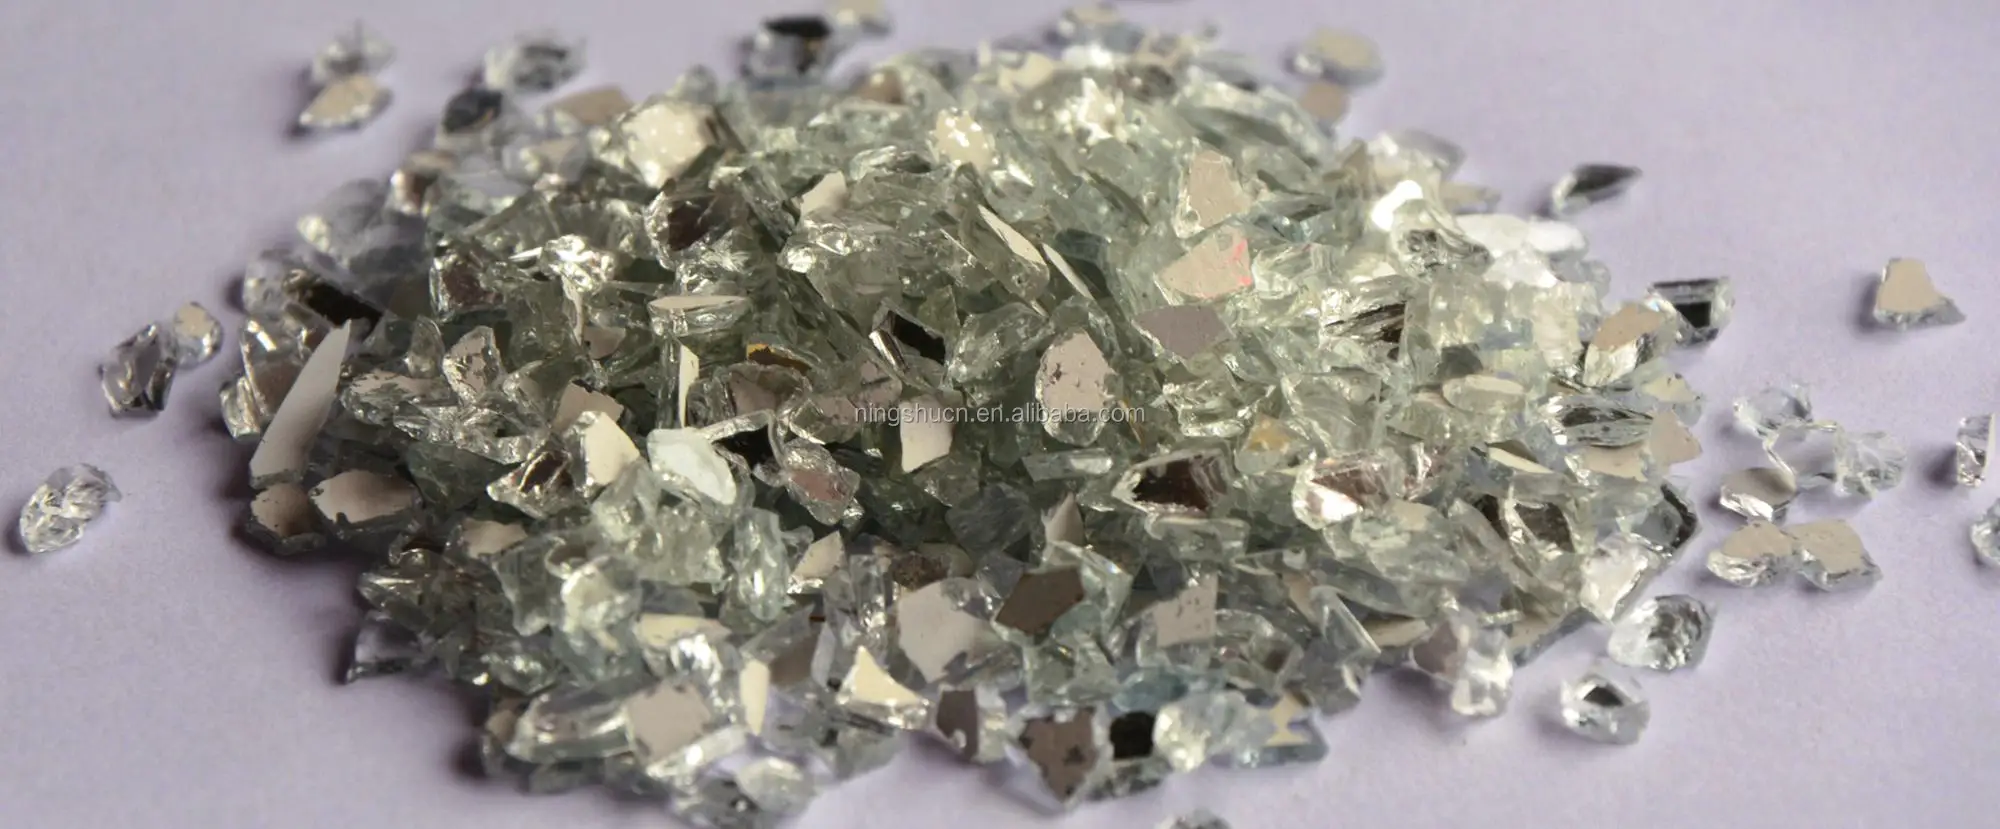 decorative glass chippings